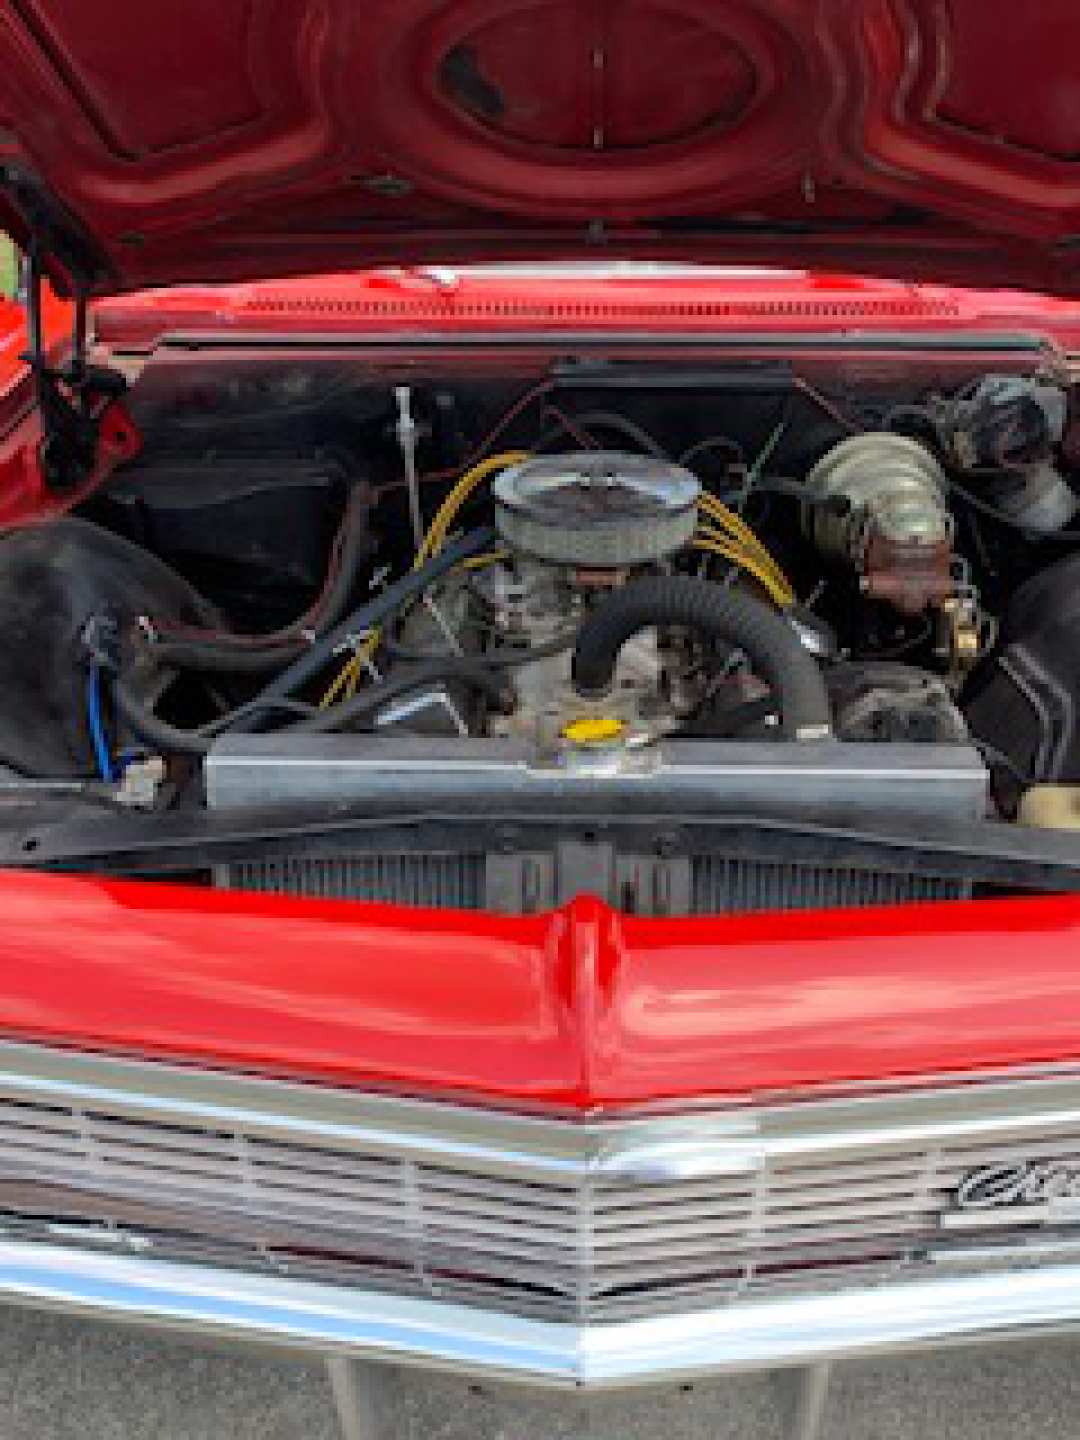 11th Image of a 1966 CHEVROLET IMPALA